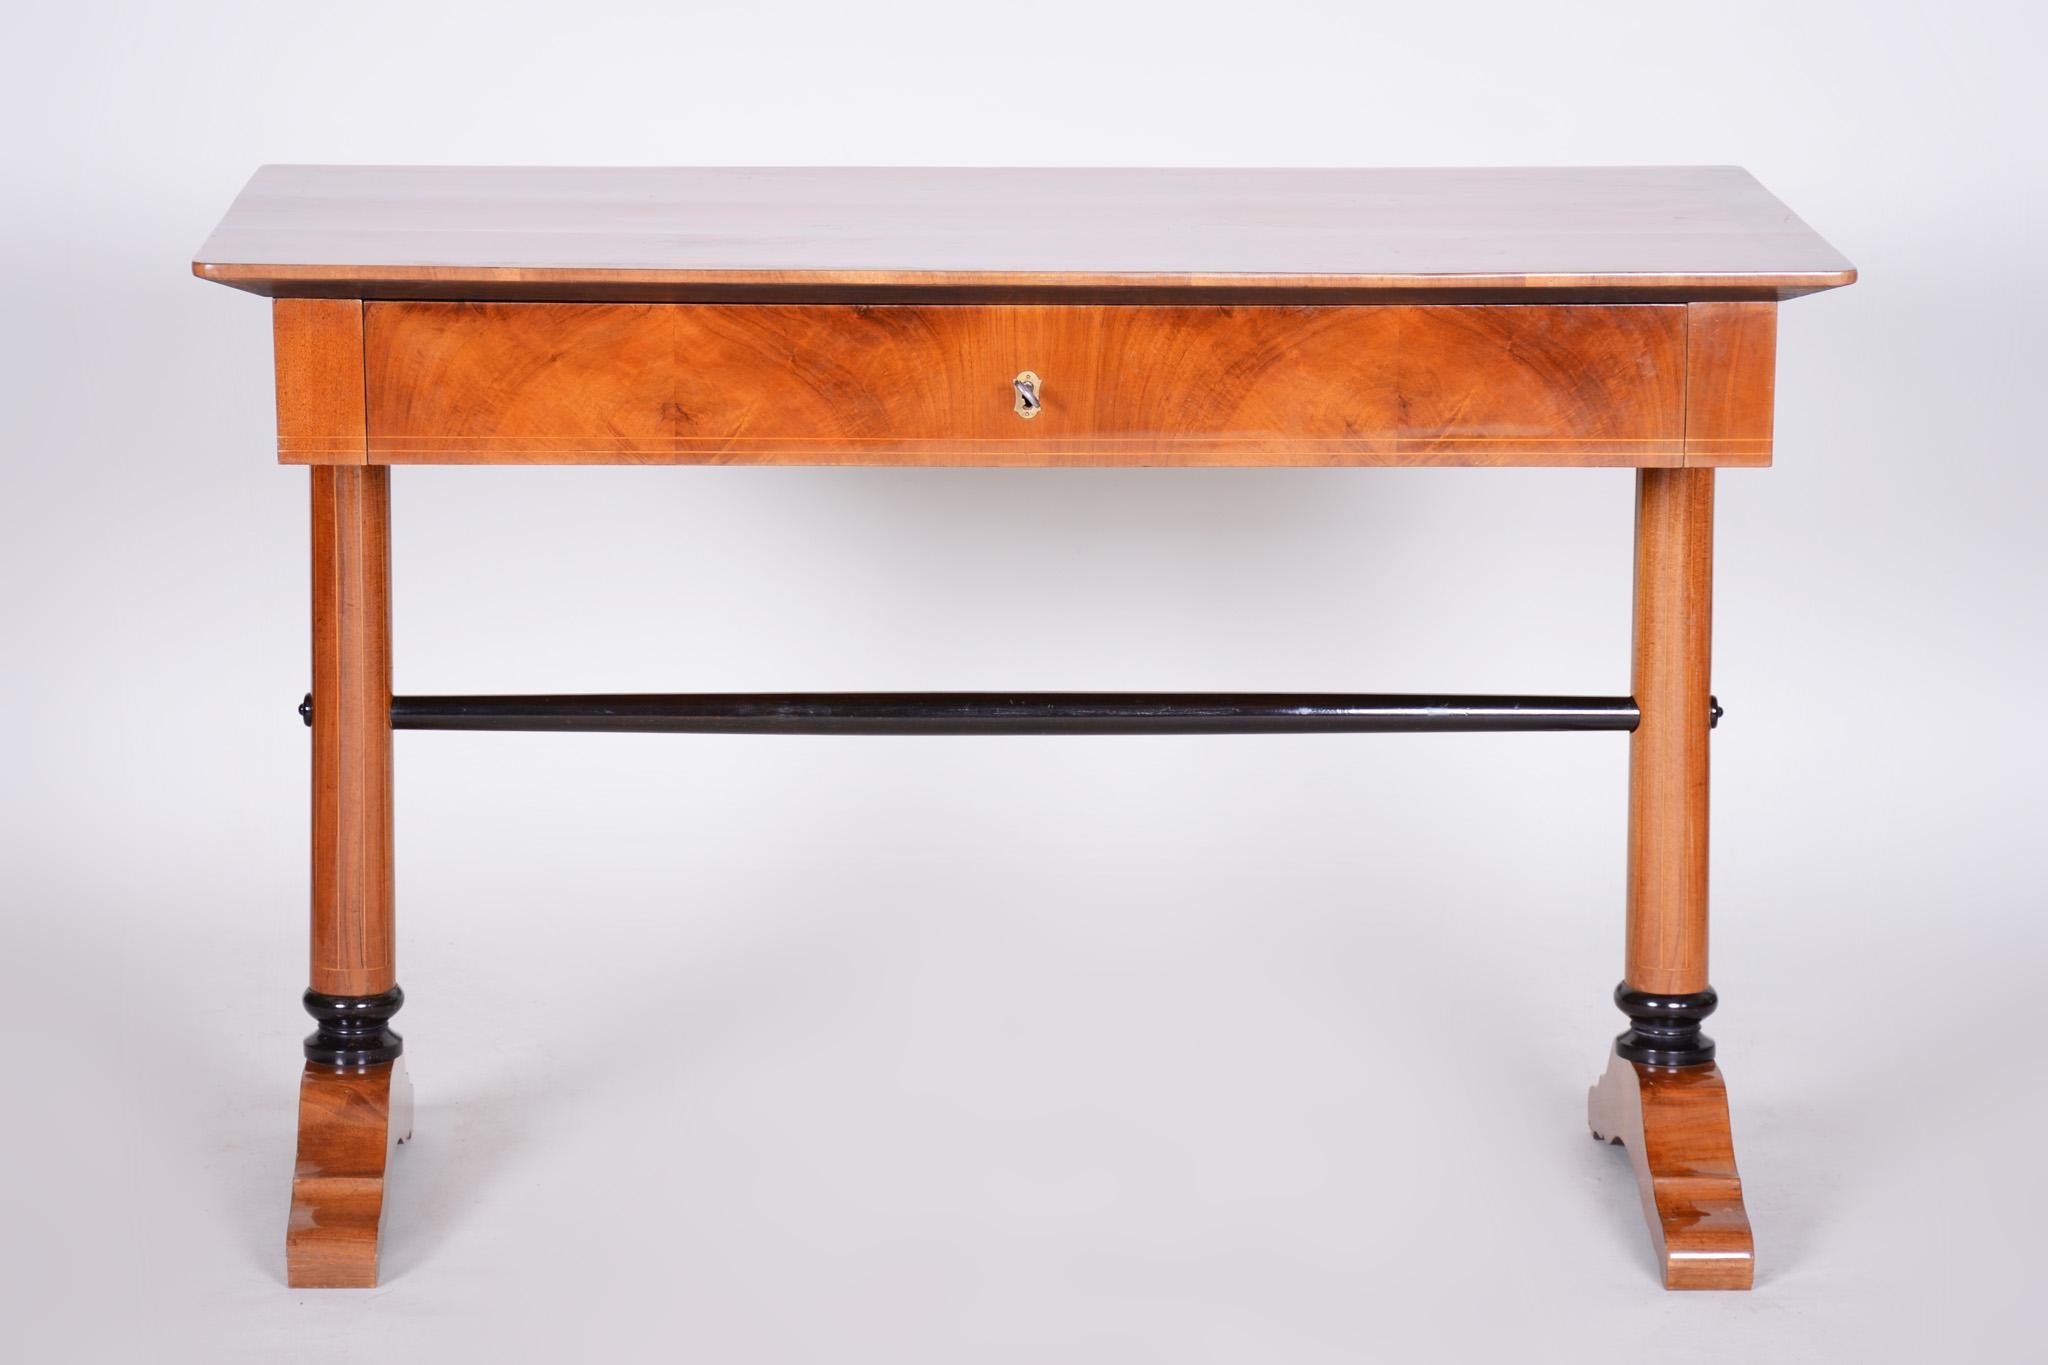 Biedermeier writing desk
Completely restored.
Shellac polish.
Material: Walnut veneer, lacquer
Source: Germany
Period: 1830-1839.